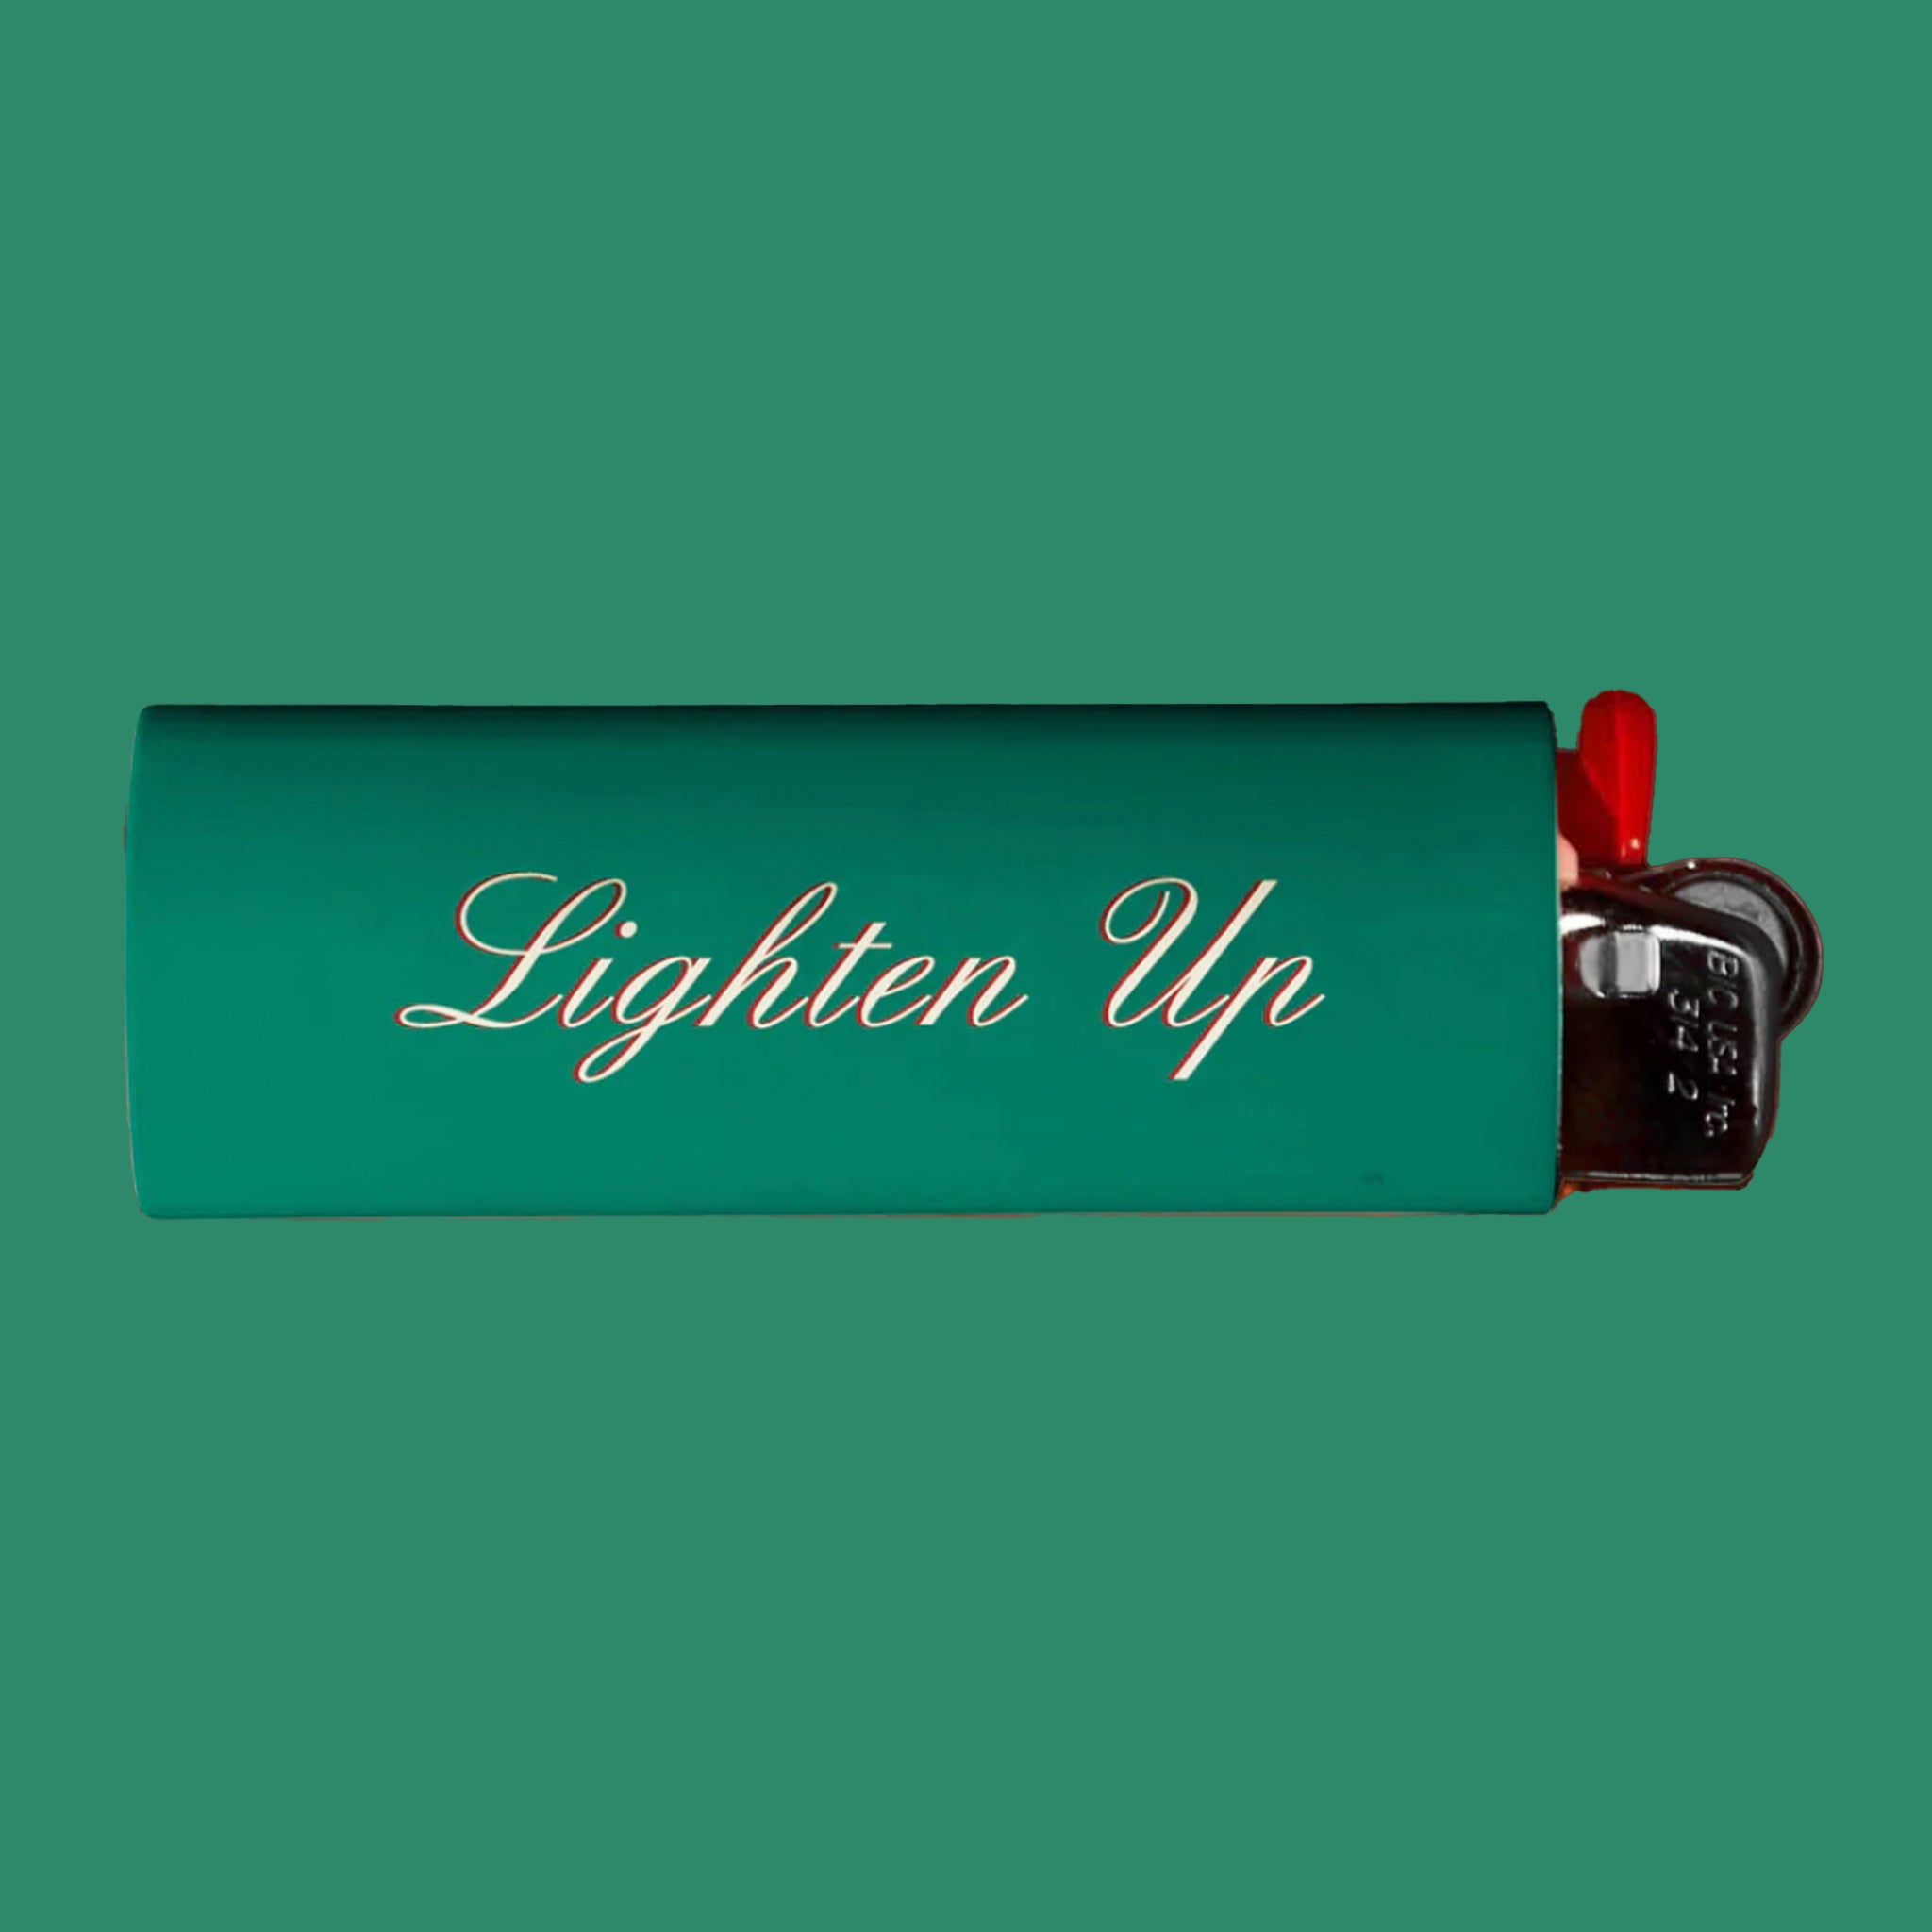 A green lighter with "Dad Grass" on one side and "Lighten Up" on the other.